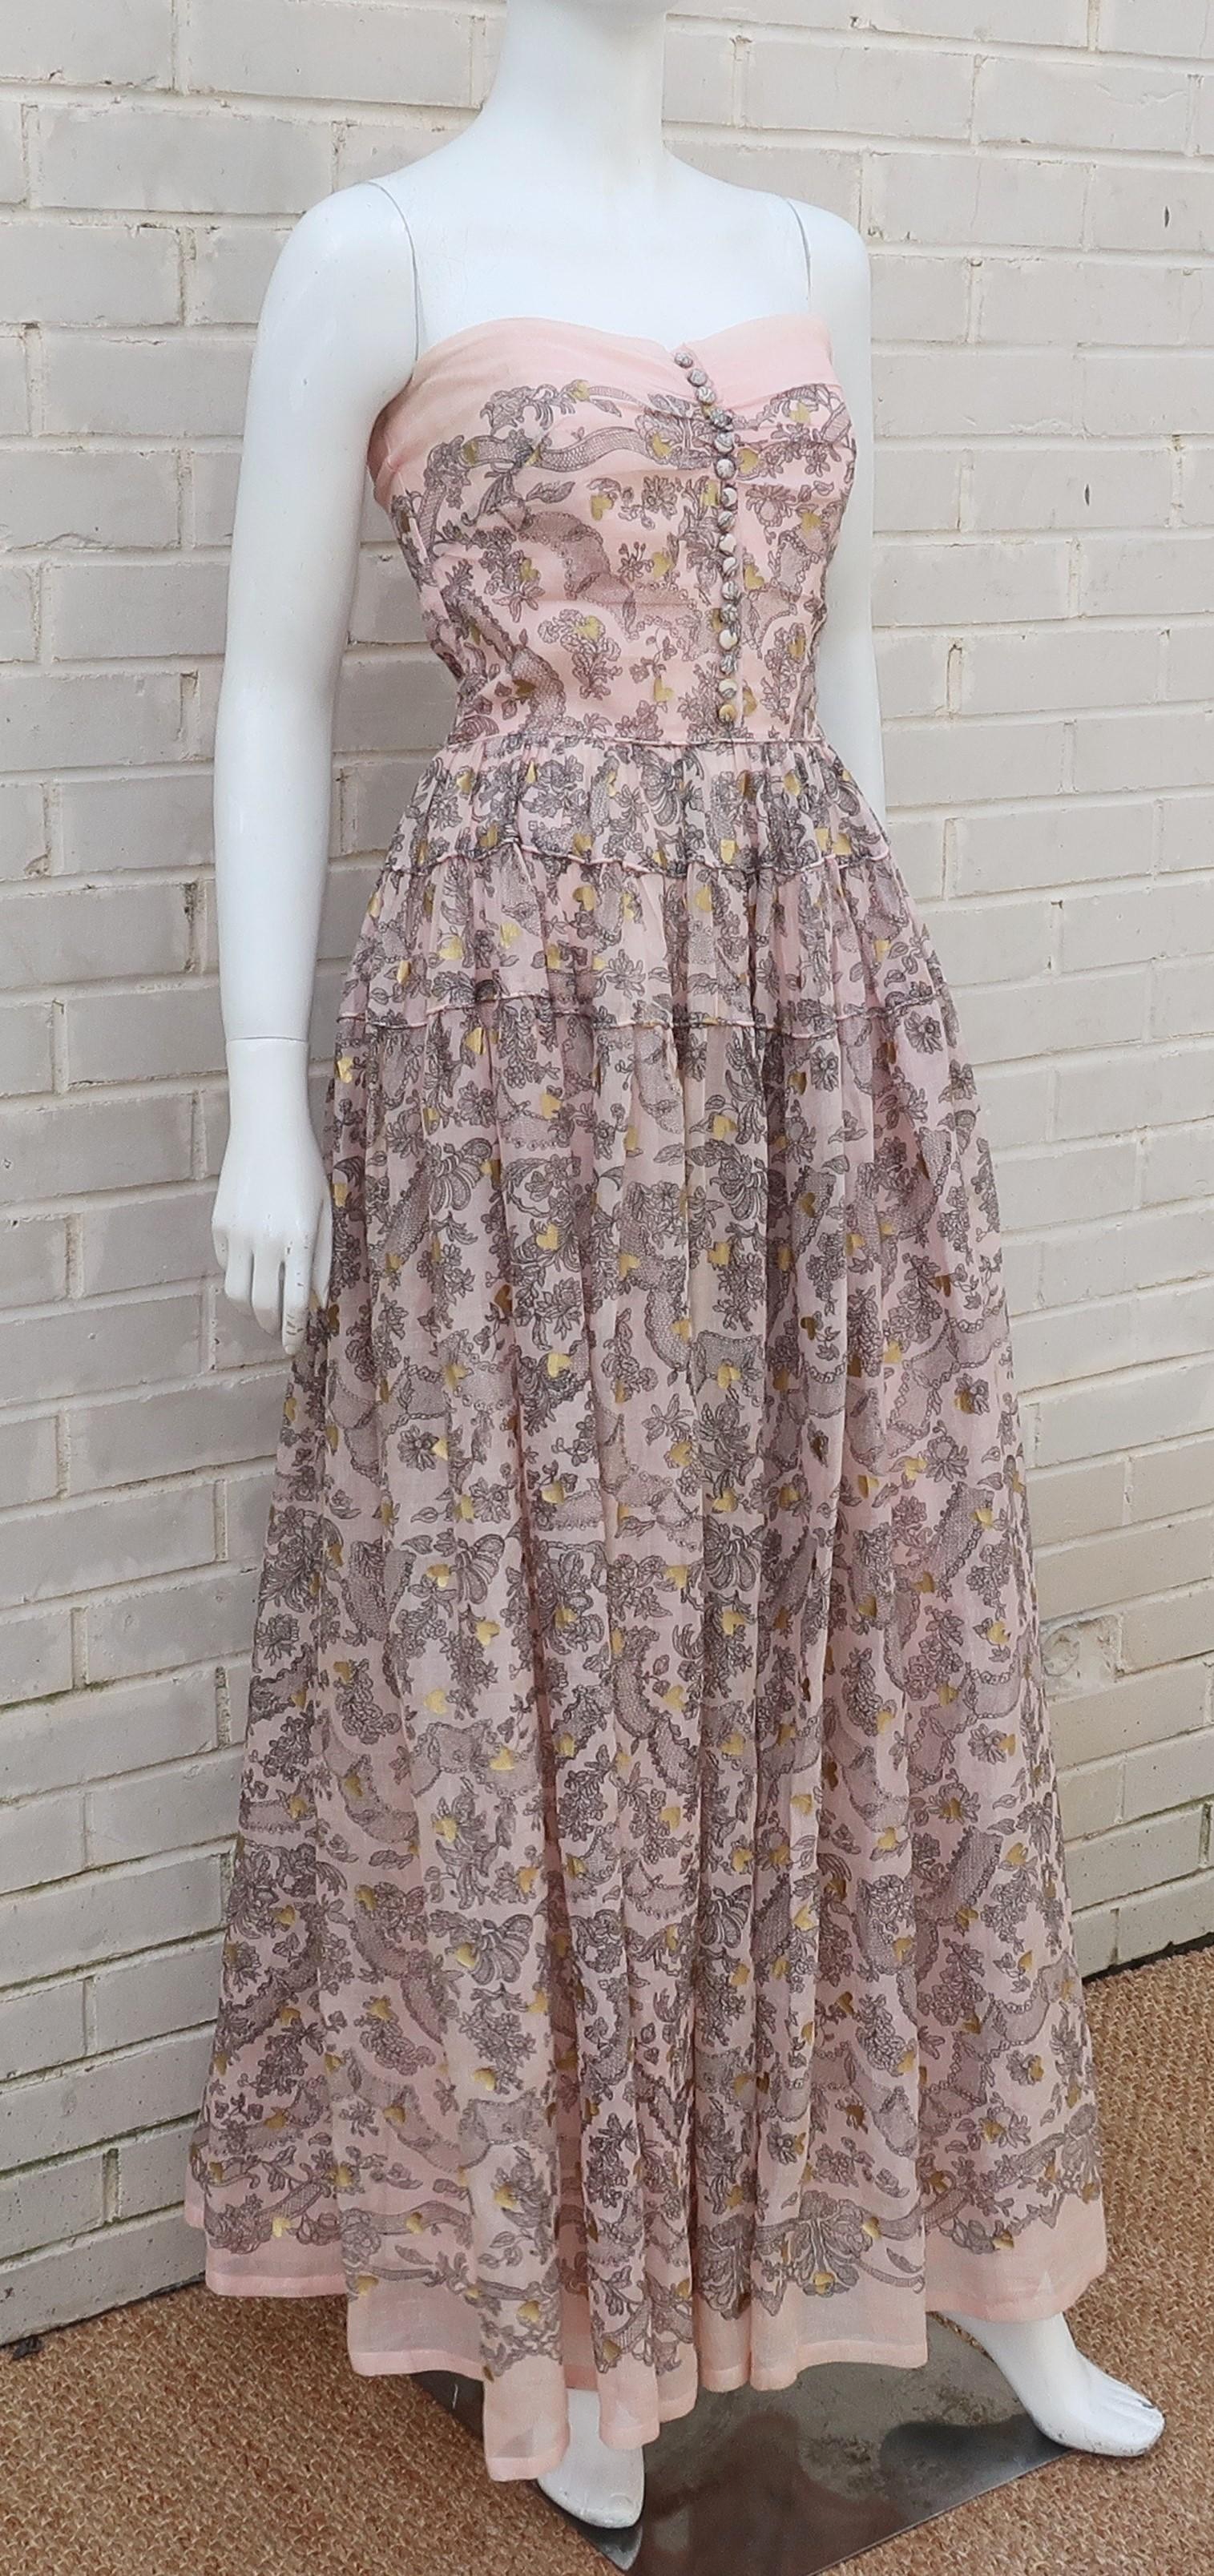 This 1950's Fred Perlberg 'Dance Originals' evening gown is loaded with charm and an expert blending of a casual fabric with a formal silhouette that is contemporary and modern, as if it was fresh off today's runways.  The semi-transparent cotton